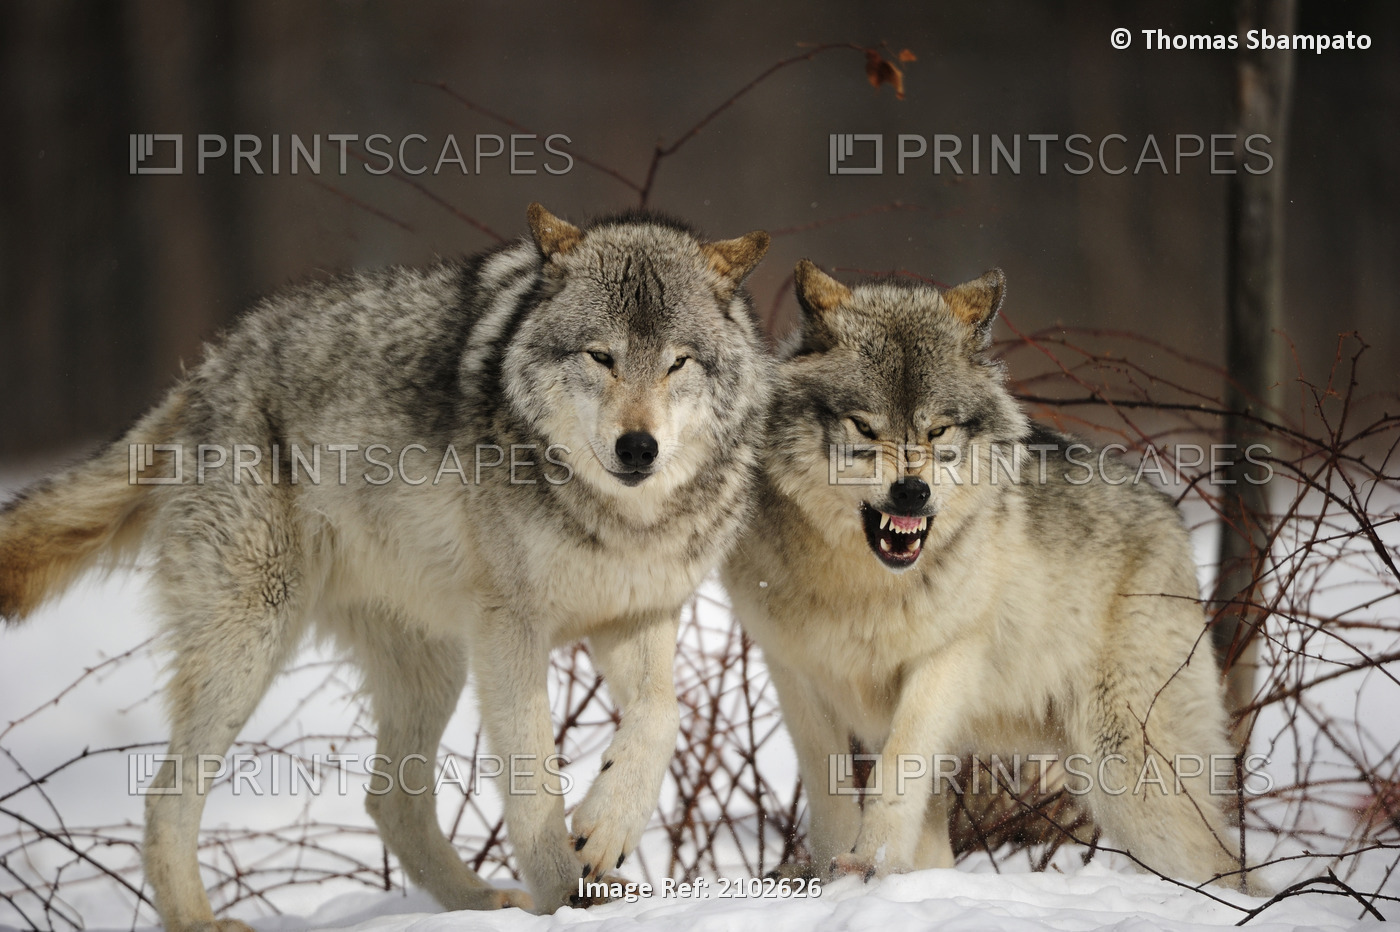 Captive, View Of Two Gray Wolf (Canis Lupus) Standing In Snow And Snarling, ...